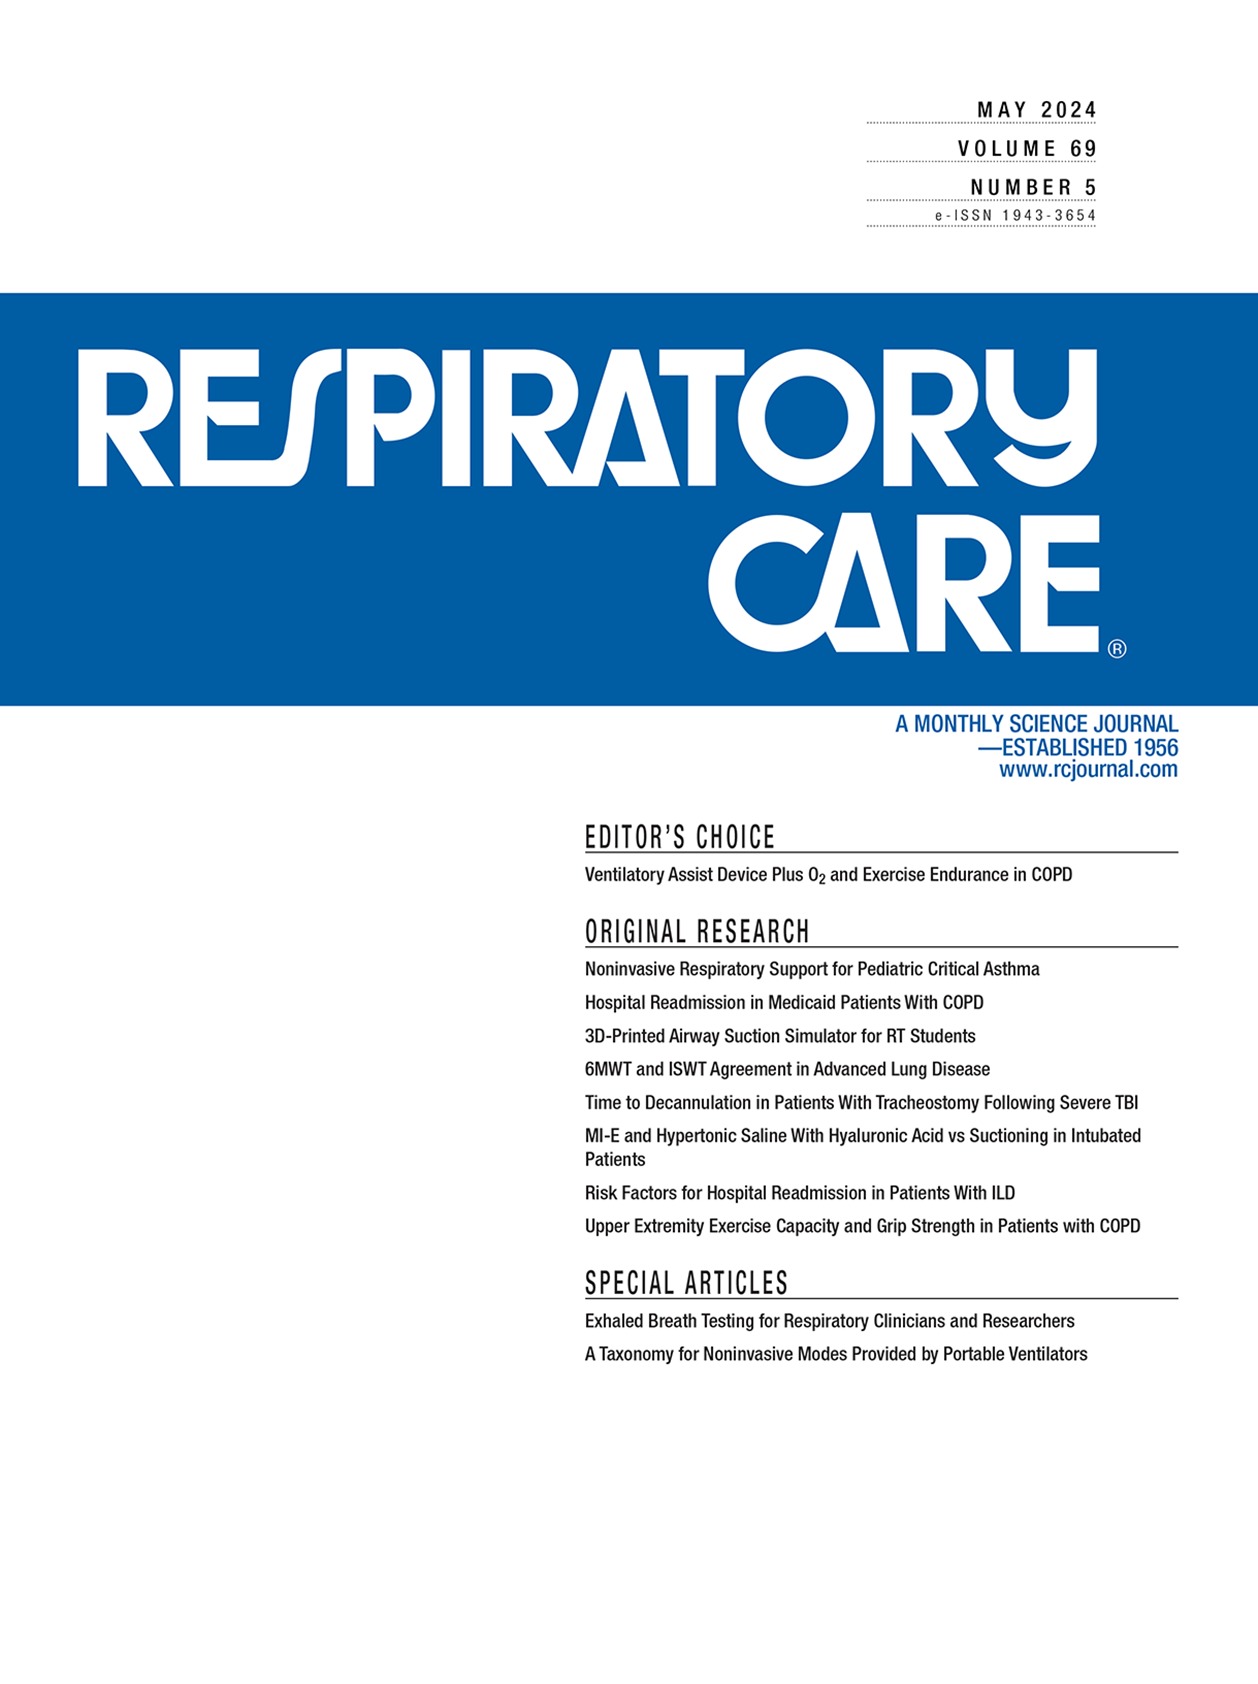 Comparison of Mechanical Insufflation-Exsufflation and Hypertonic Saline and Hyaluronic Acid With Conventional Open Catheter Suctioning in Intubated Patients